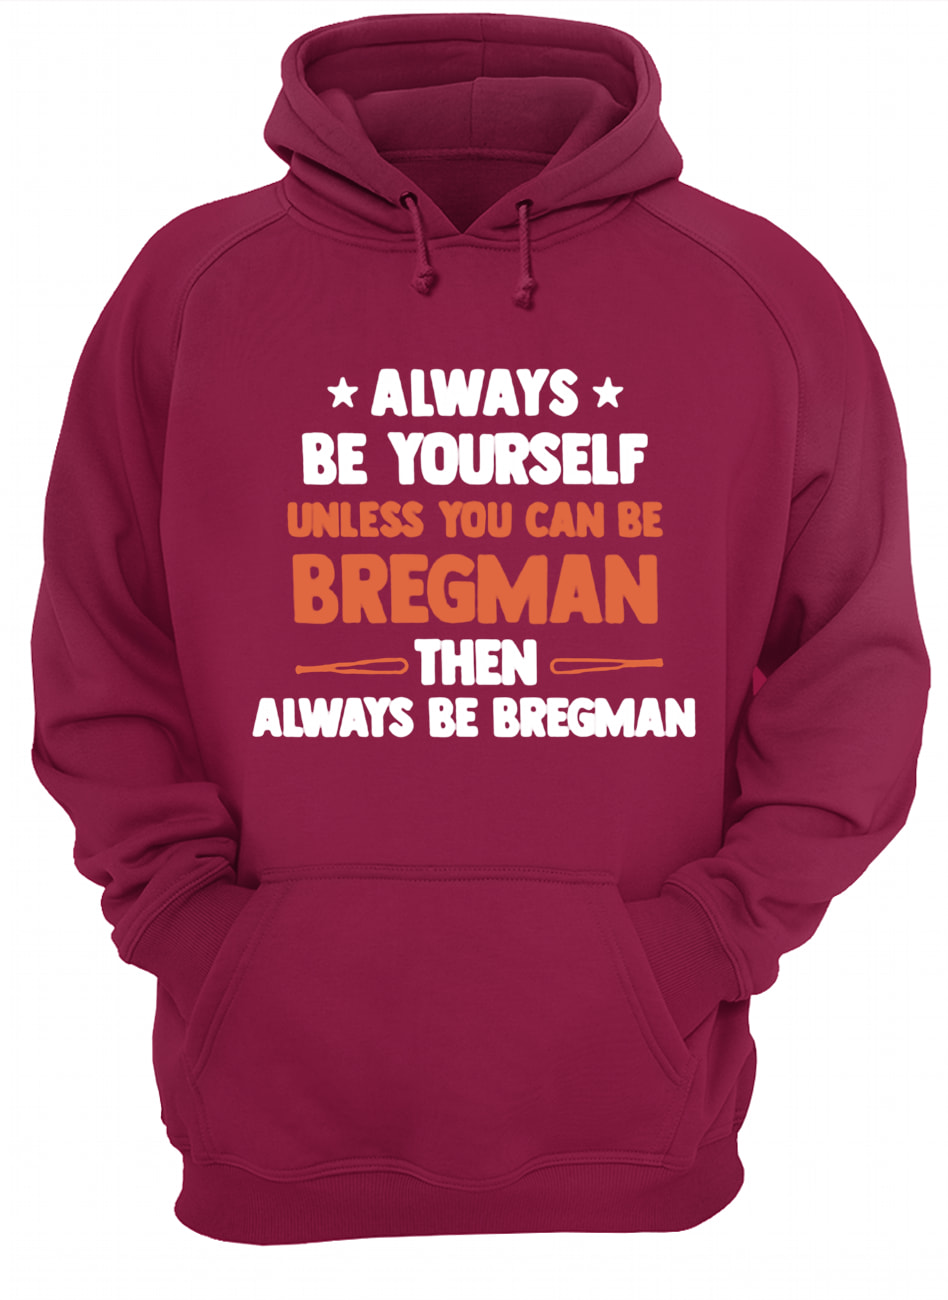 Always be yourself unless you can be bregman then always be bregman hoodie